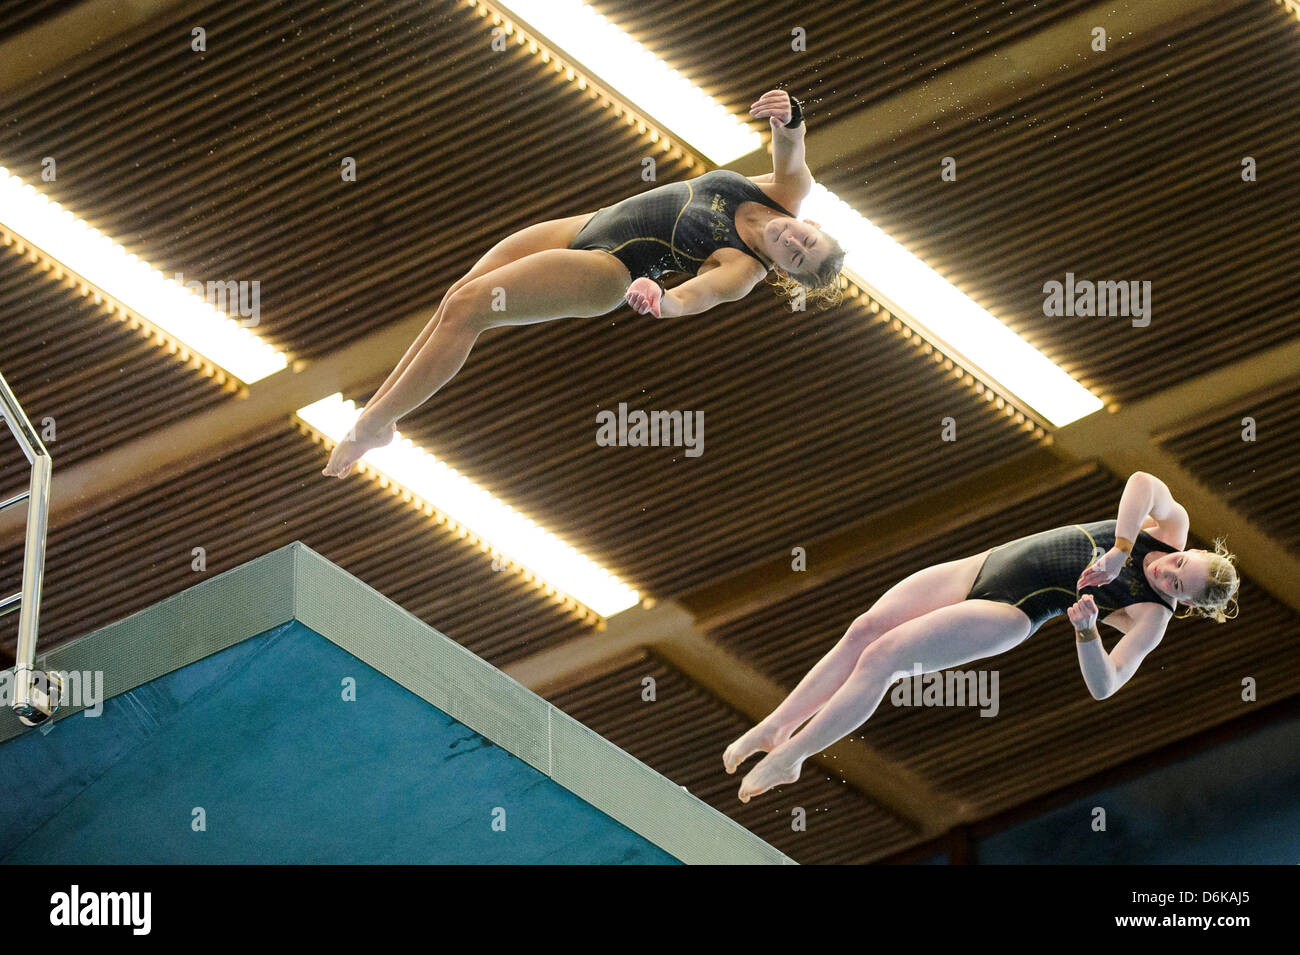 19.04.2013 Edinburgh, Scotland.Emily Boyd &amp; Lara Tarvit of Australia (AUS) in action during the Womens 10m Synchronised Platform Final on Day 1 of the FINA/Midea Diving World Series 2013 at the Royal Commonwealth Pool in Edinburgh. Stock Photo